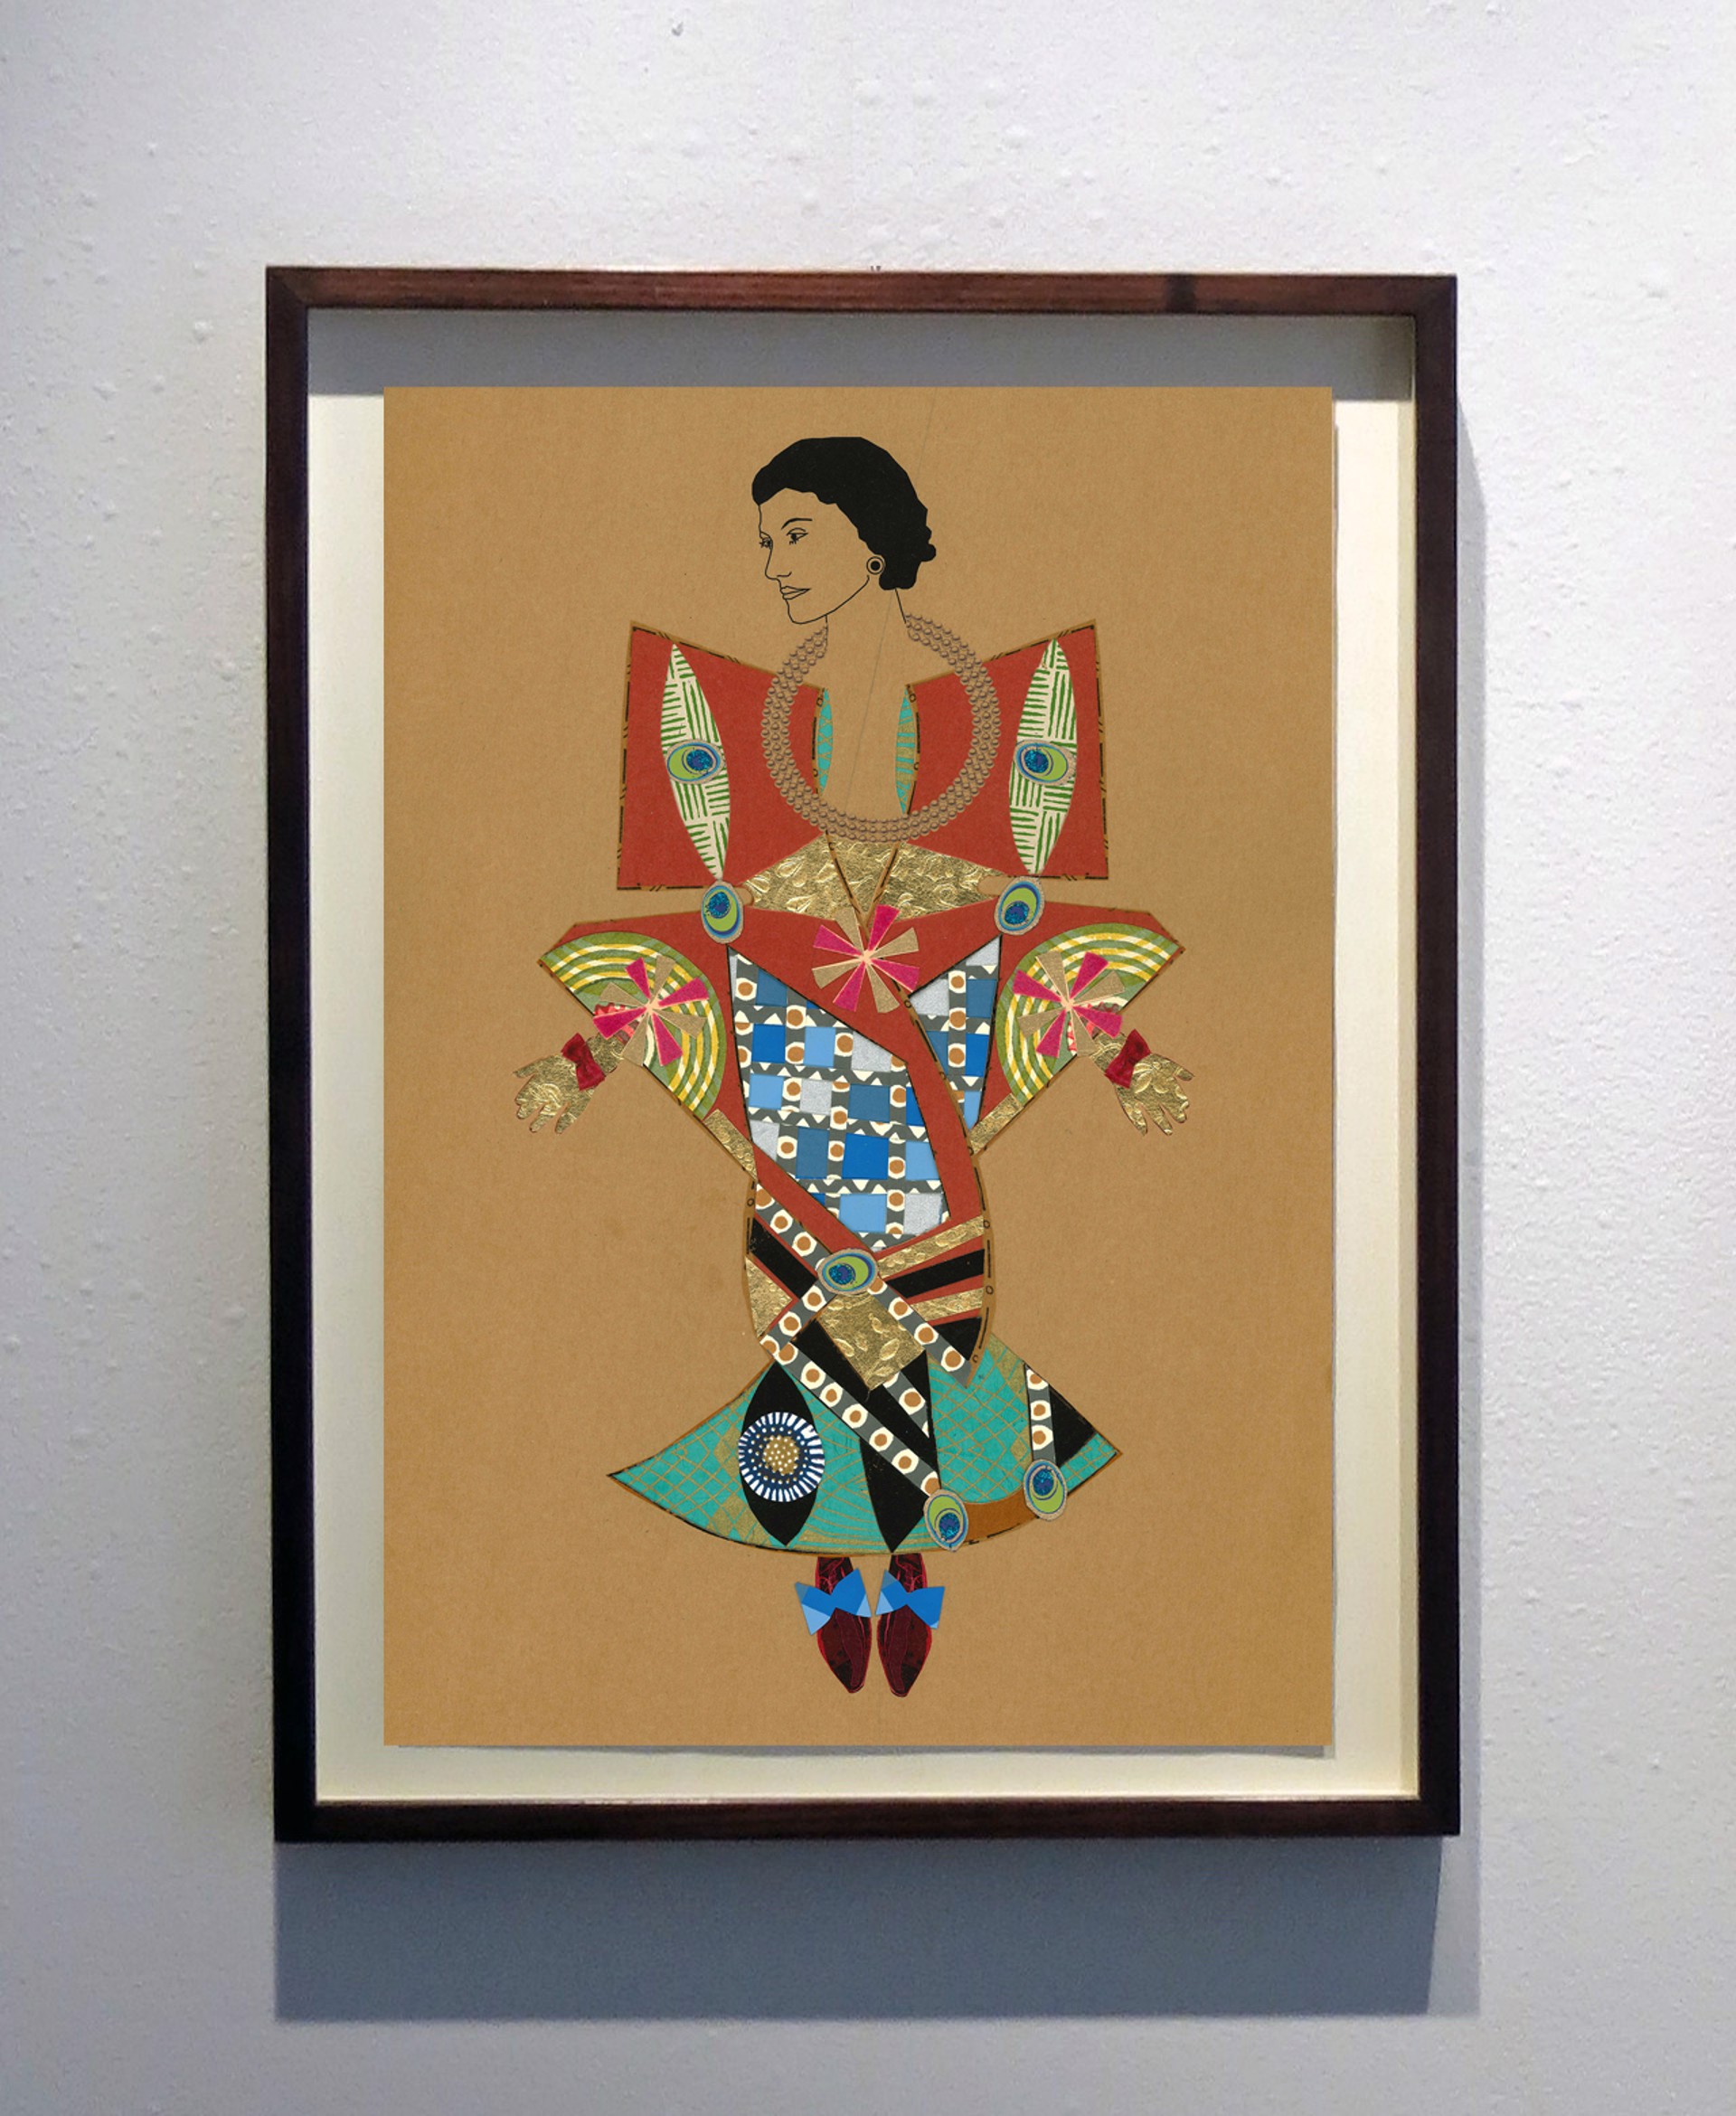 A Study on Coco n°7 by Hormazd Narielwalla